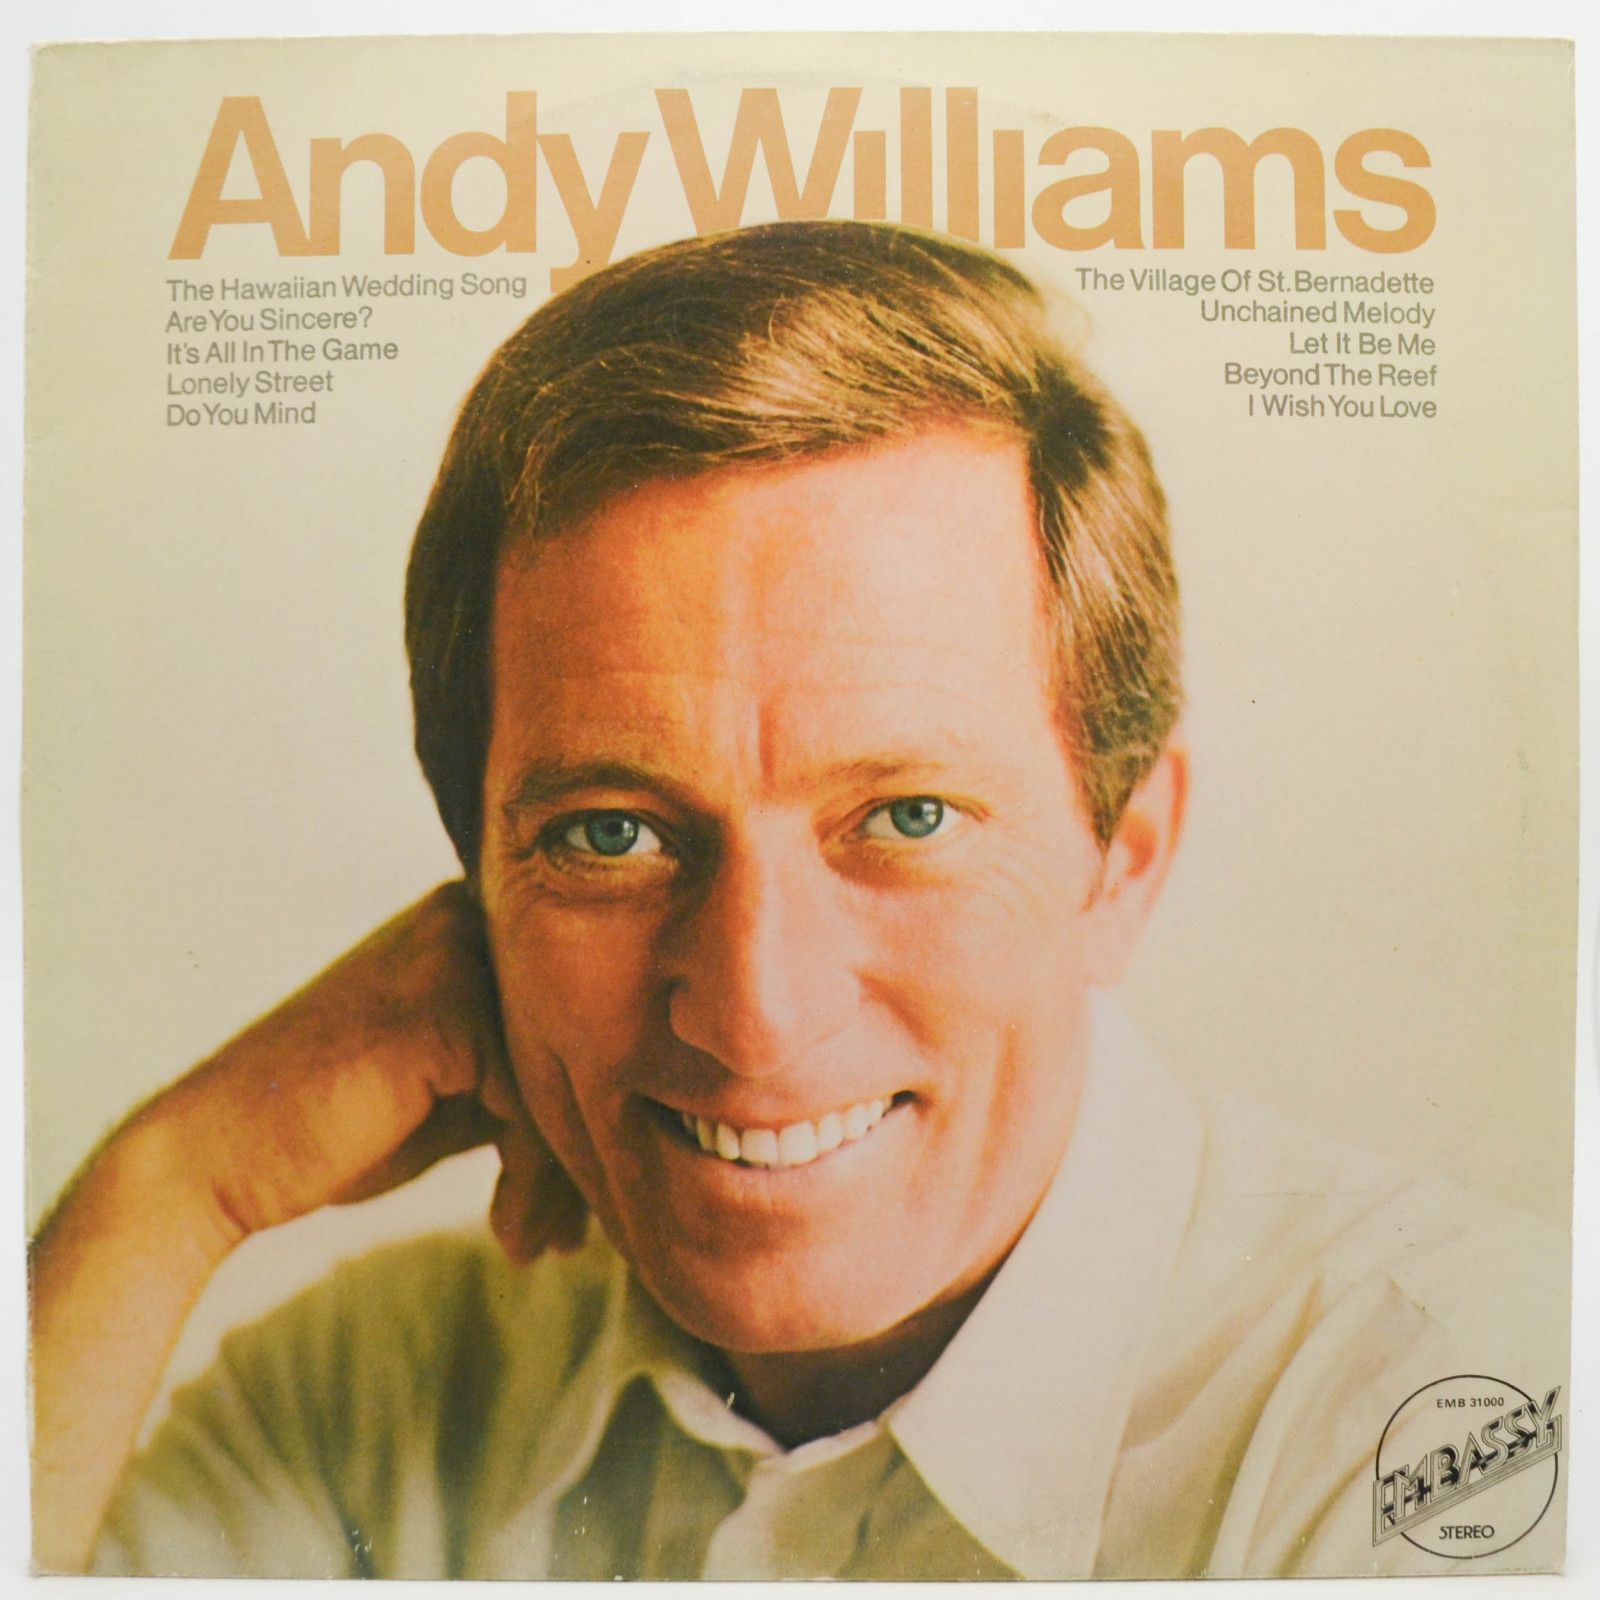 Andy Williams — Andy Williams, 1973